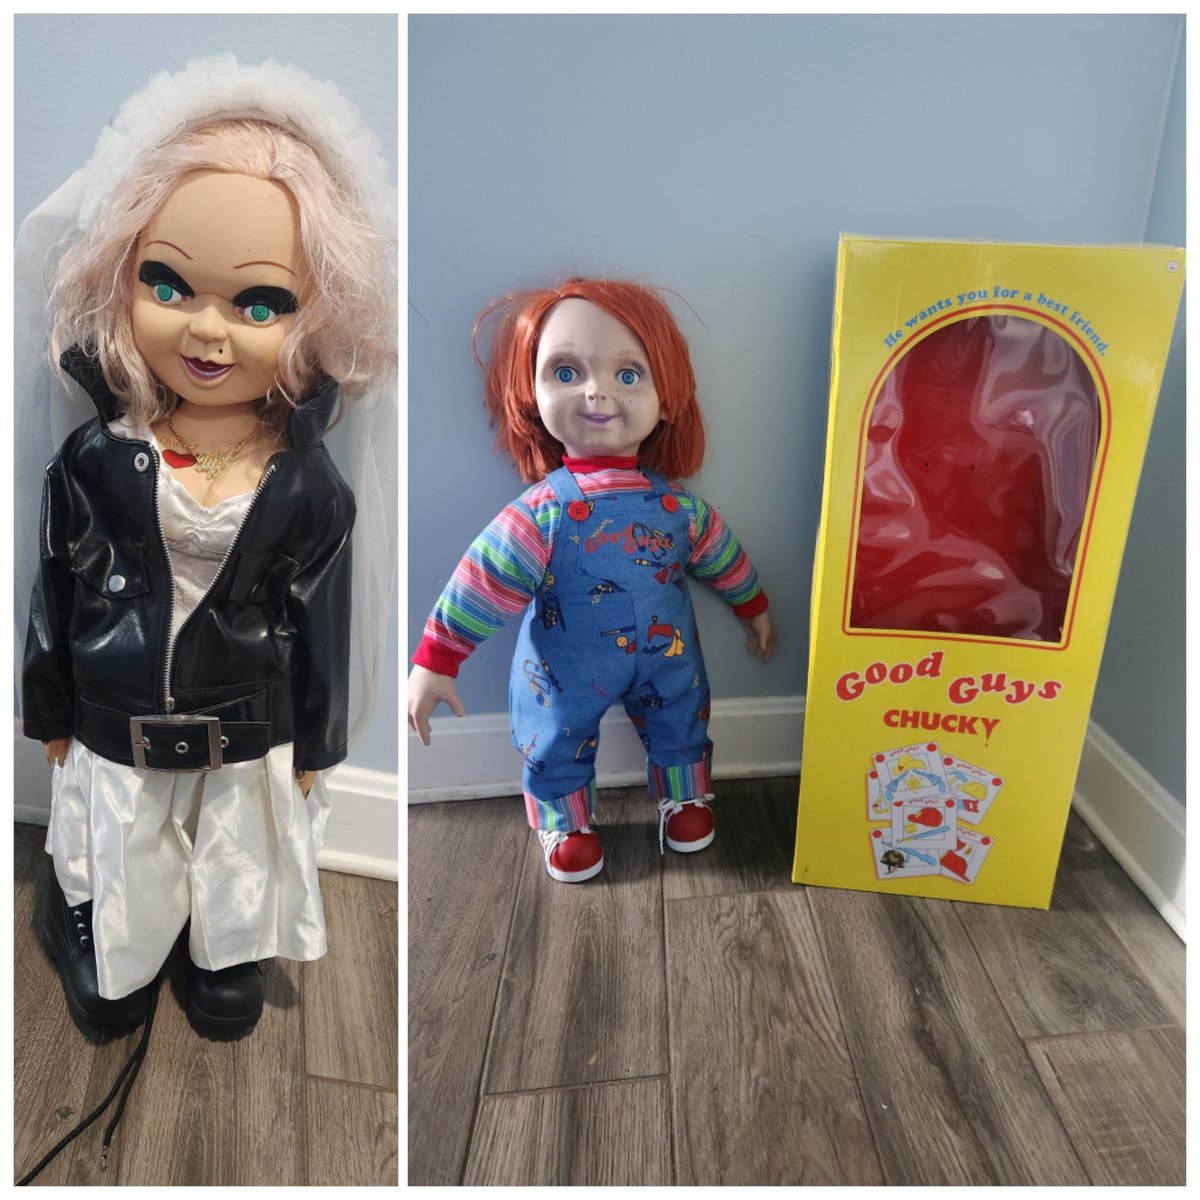 Just added a Chucky and Tiffany to my store!! Both available now!!!

#ebay #chucky #childsplay #horror #movie #horrormoviesandchill #horrormovie #availablenow #doll #figure #Collectible